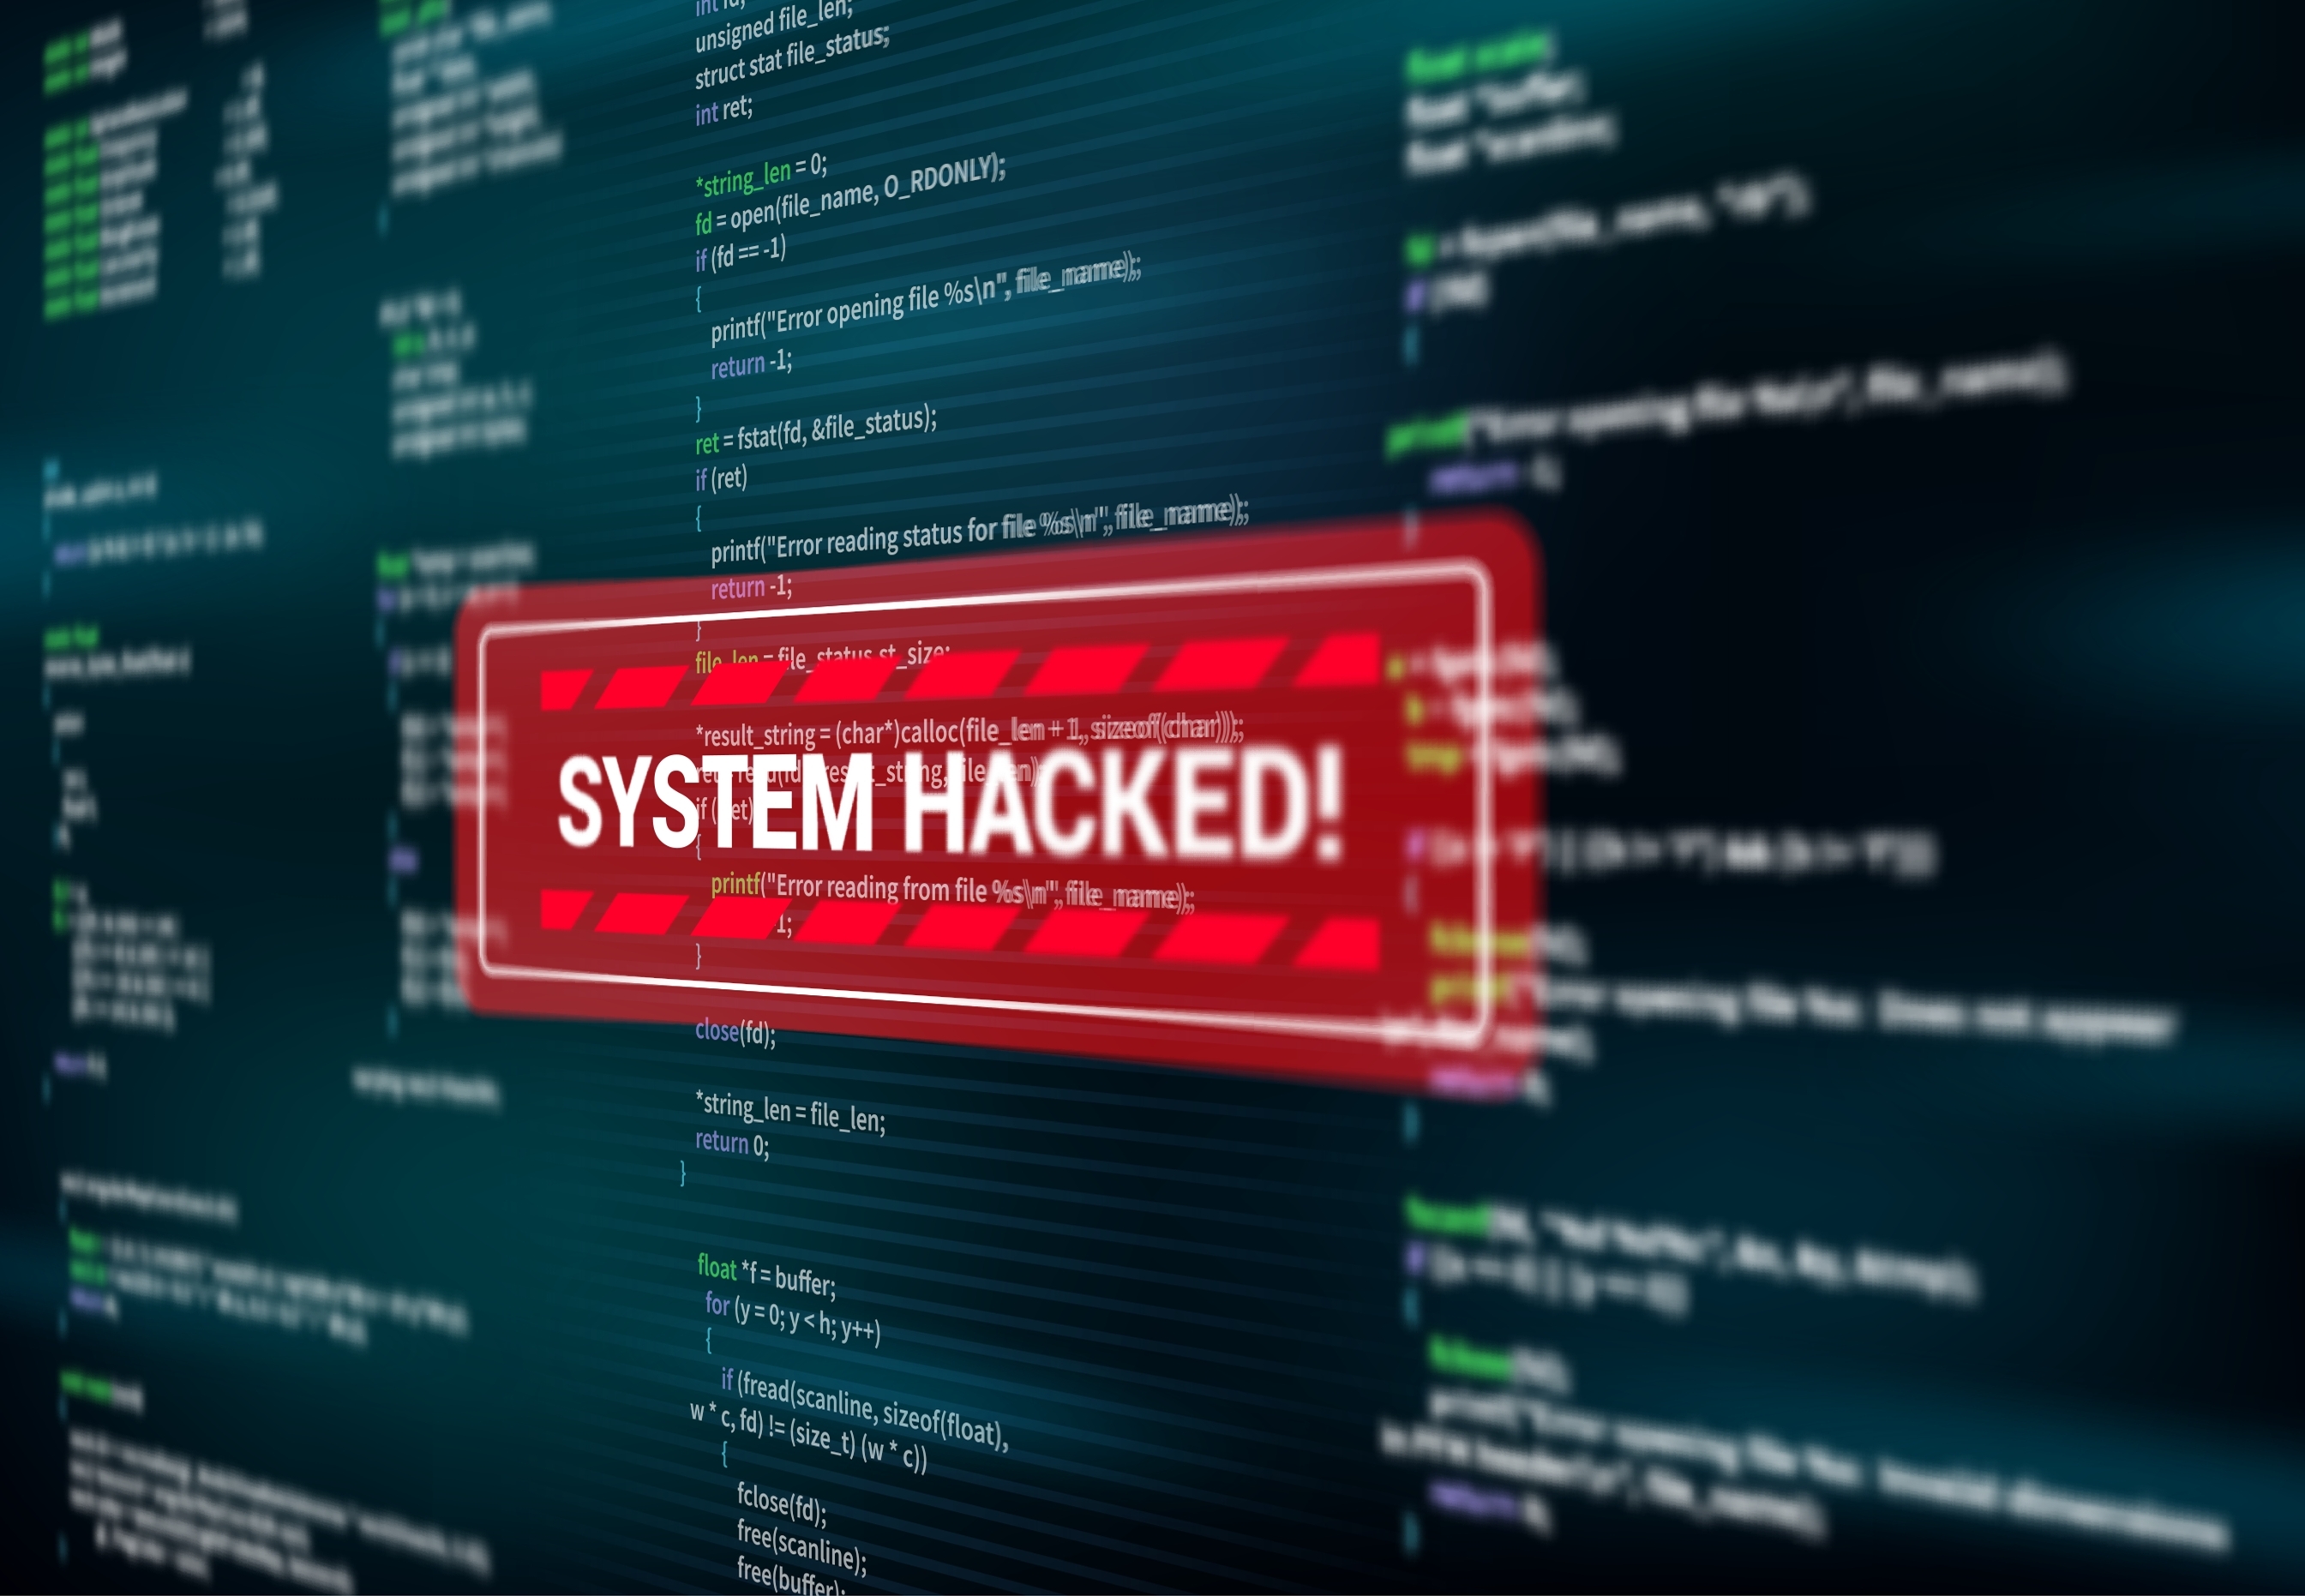 system hacked notification on computer